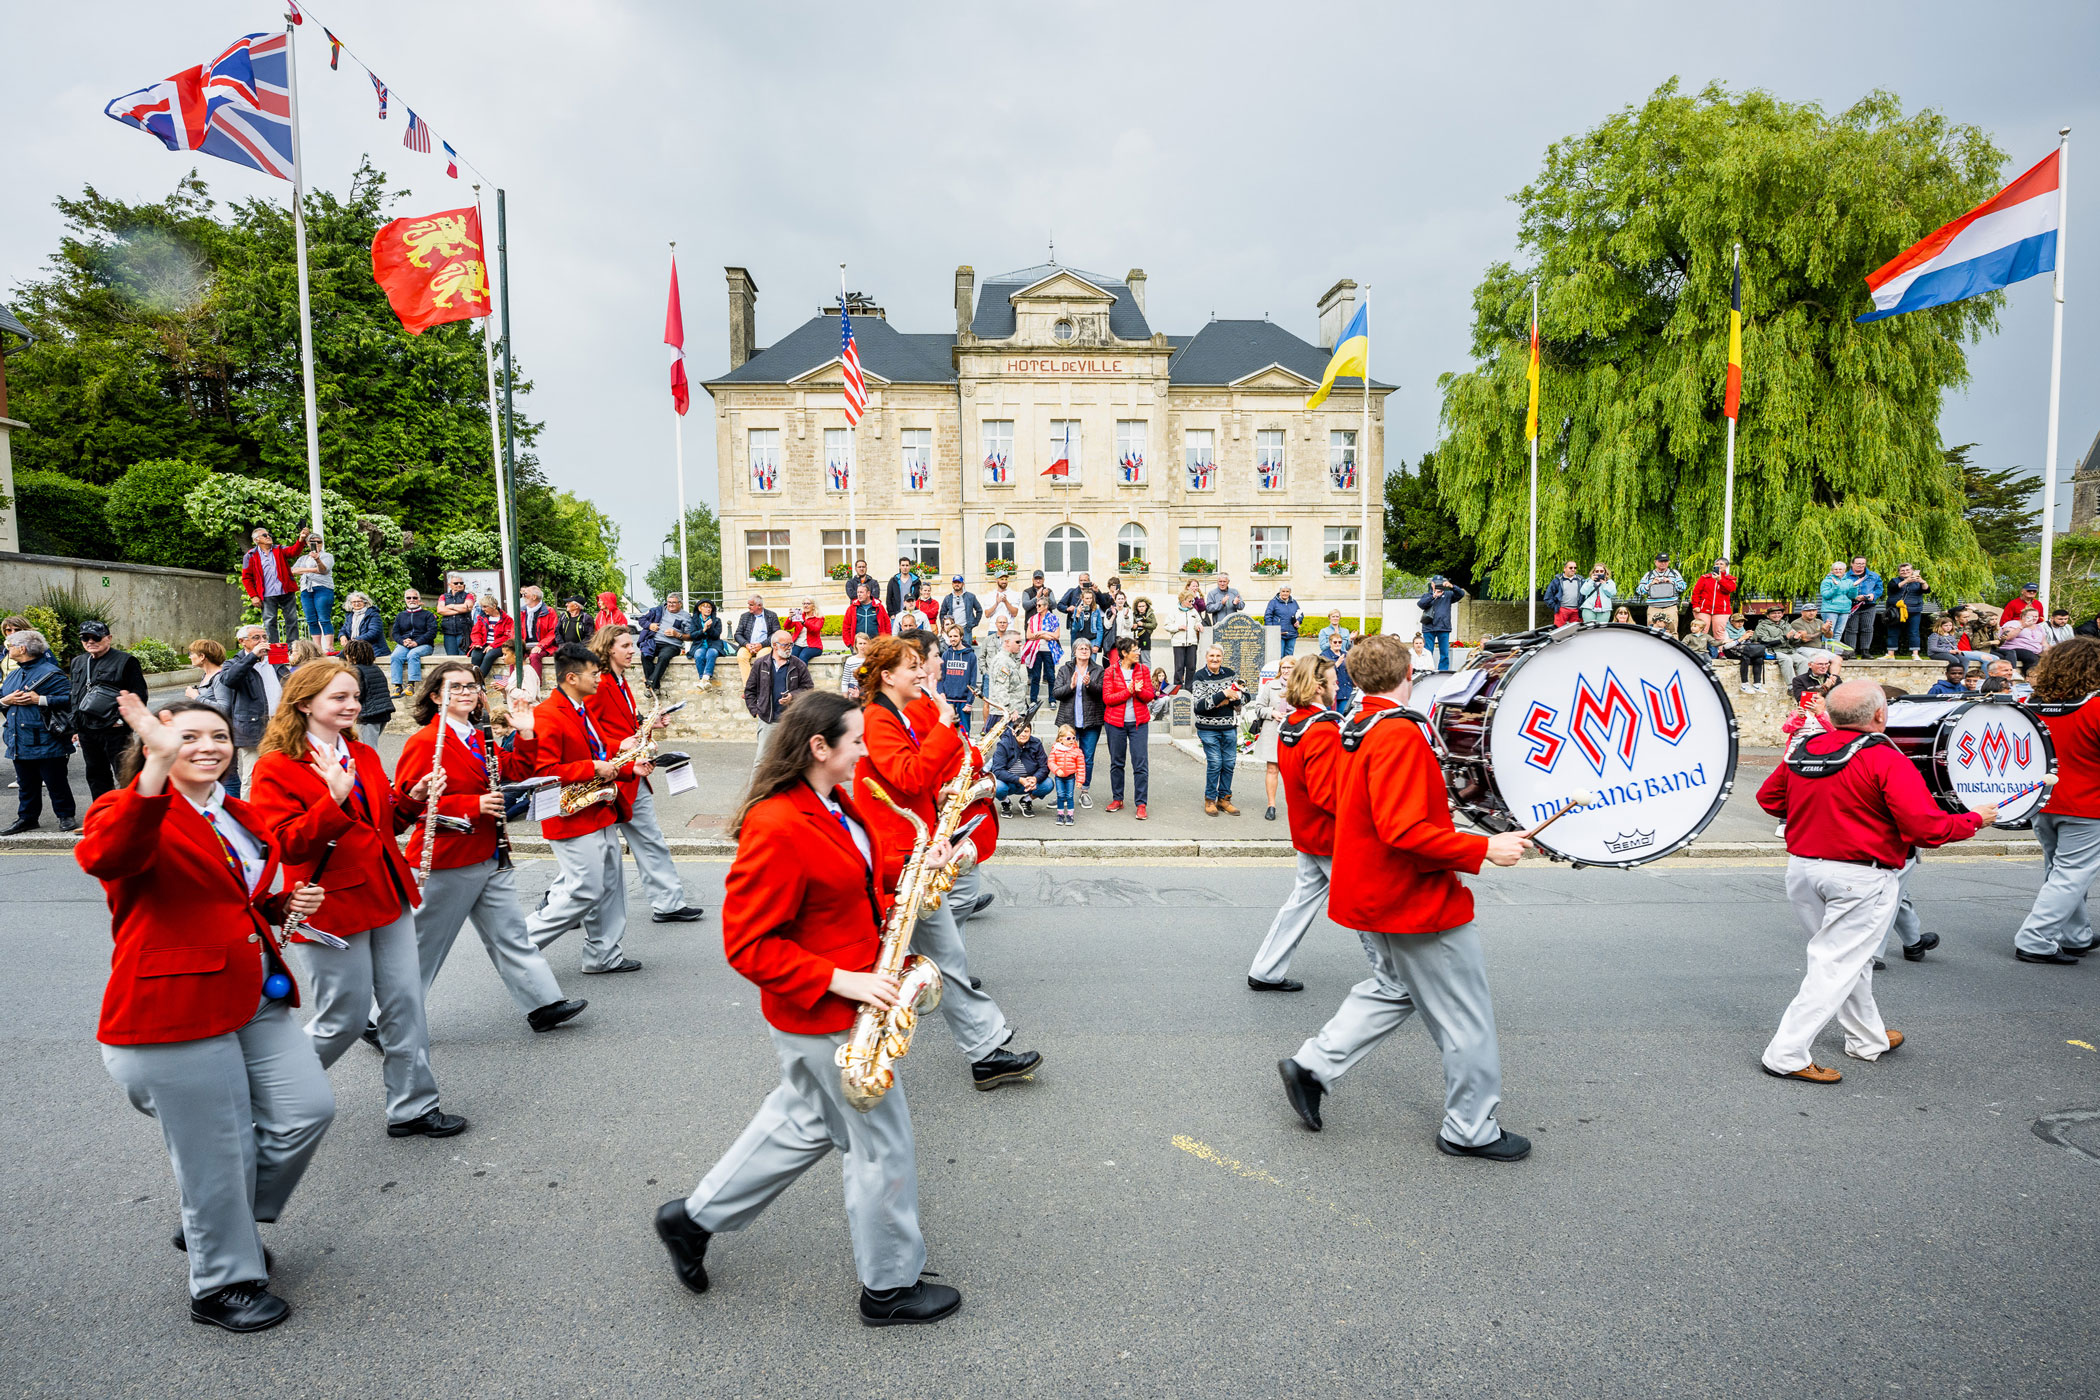 Mustang Band in Sainte Mere Eglise France parade June 2022